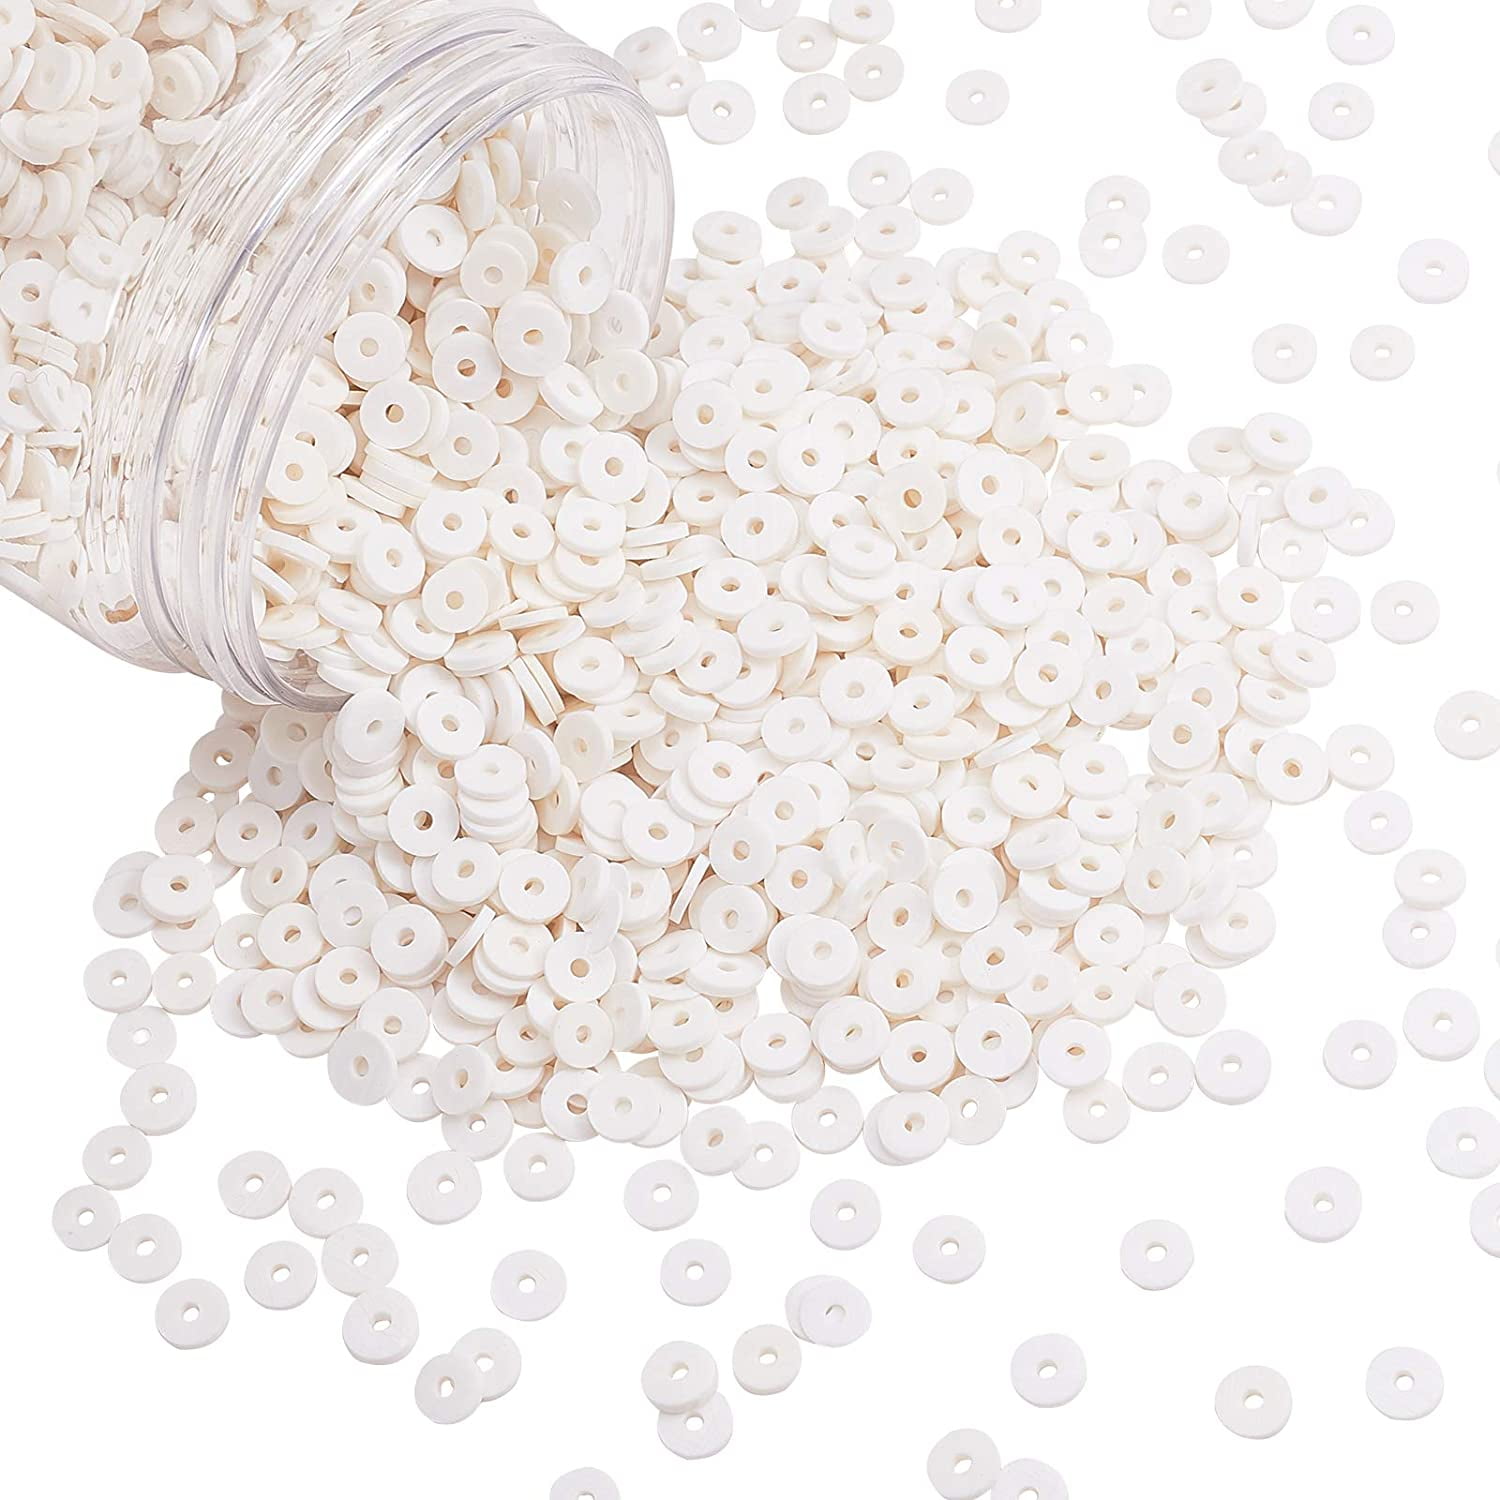 BEEFLYING 10 Strands White Clay Beads for Bracelets Making Disc